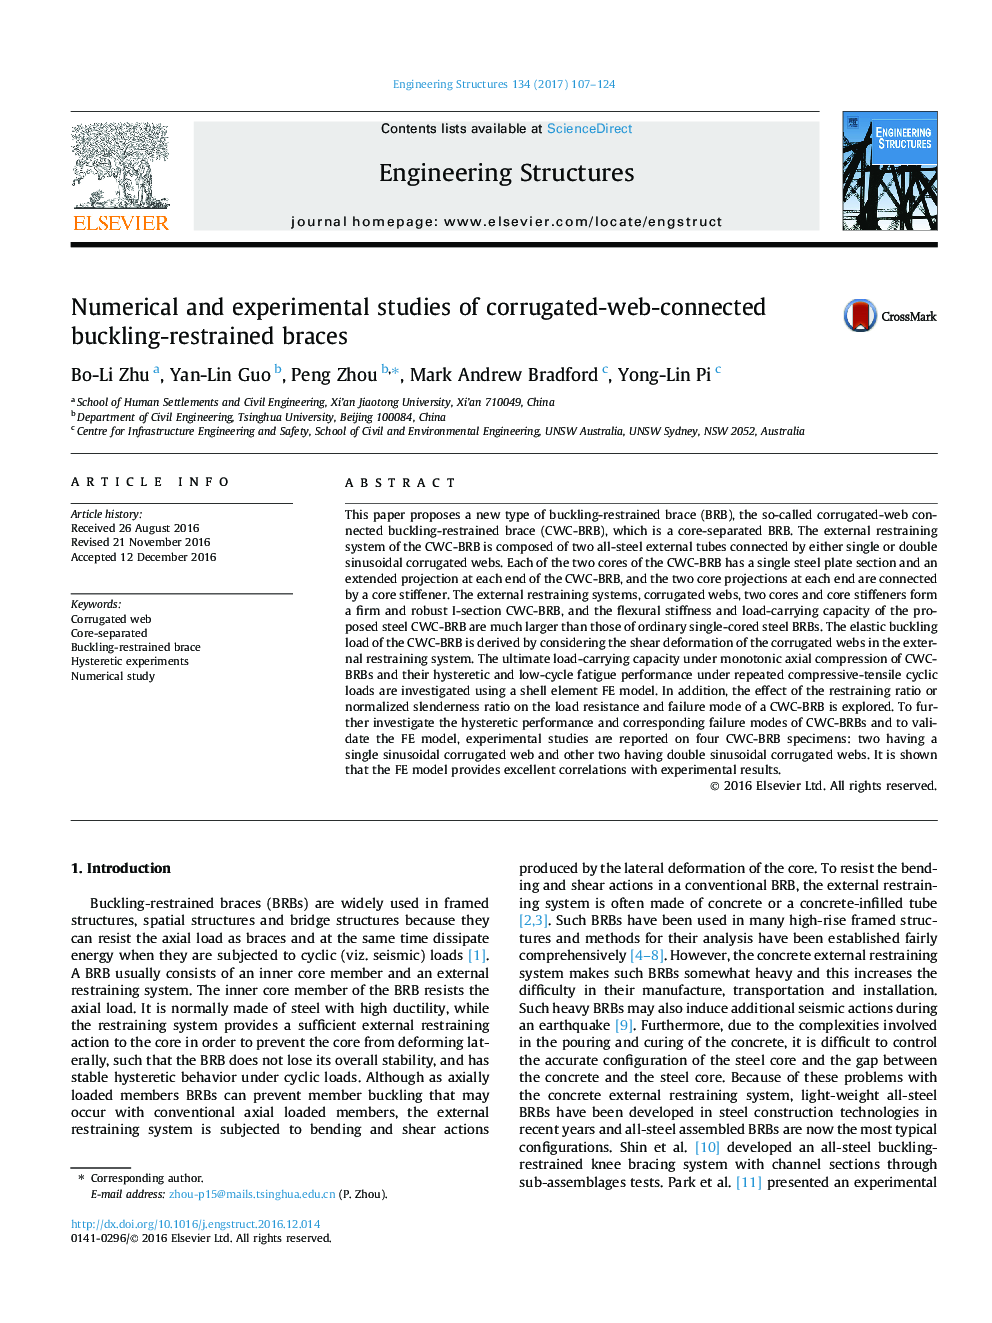 Numerical and experimental studies of corrugated-web-connected buckling-restrained braces